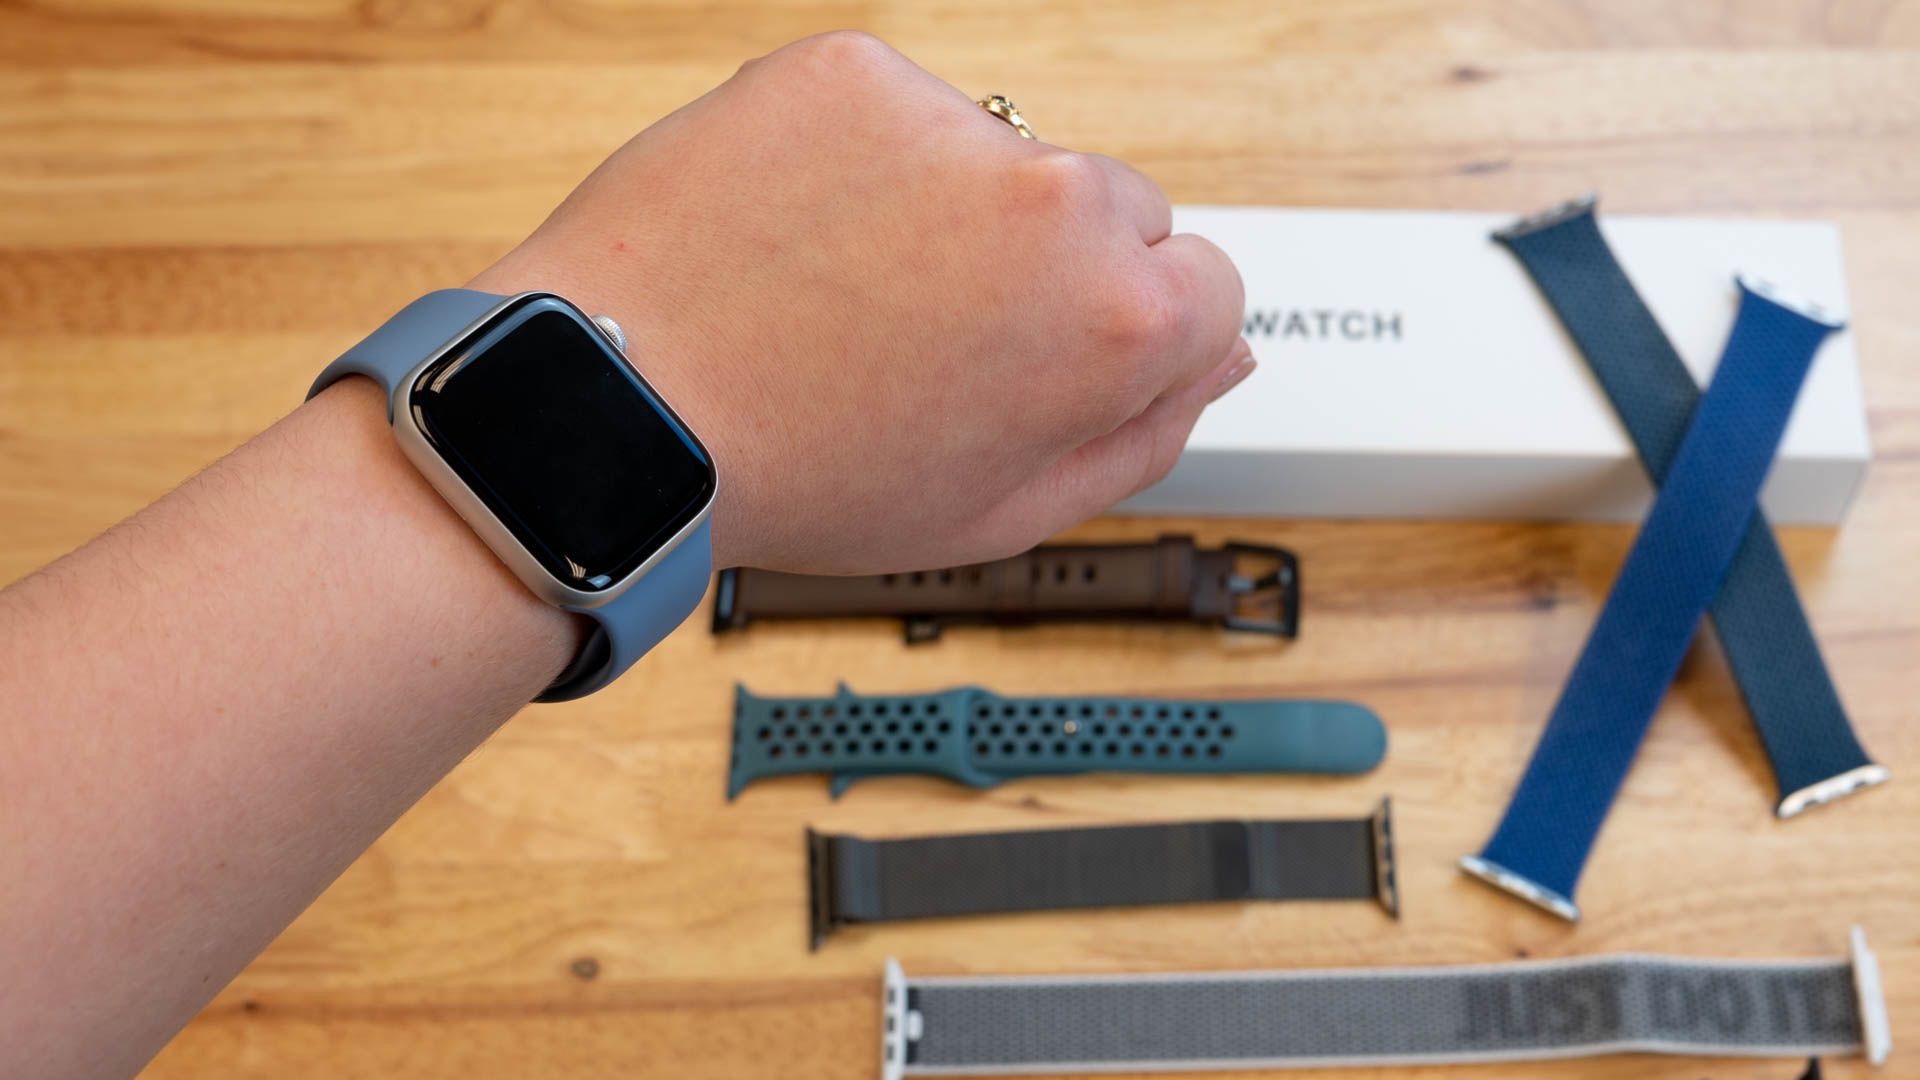 Numerous Apple Watch Bands laying on a table